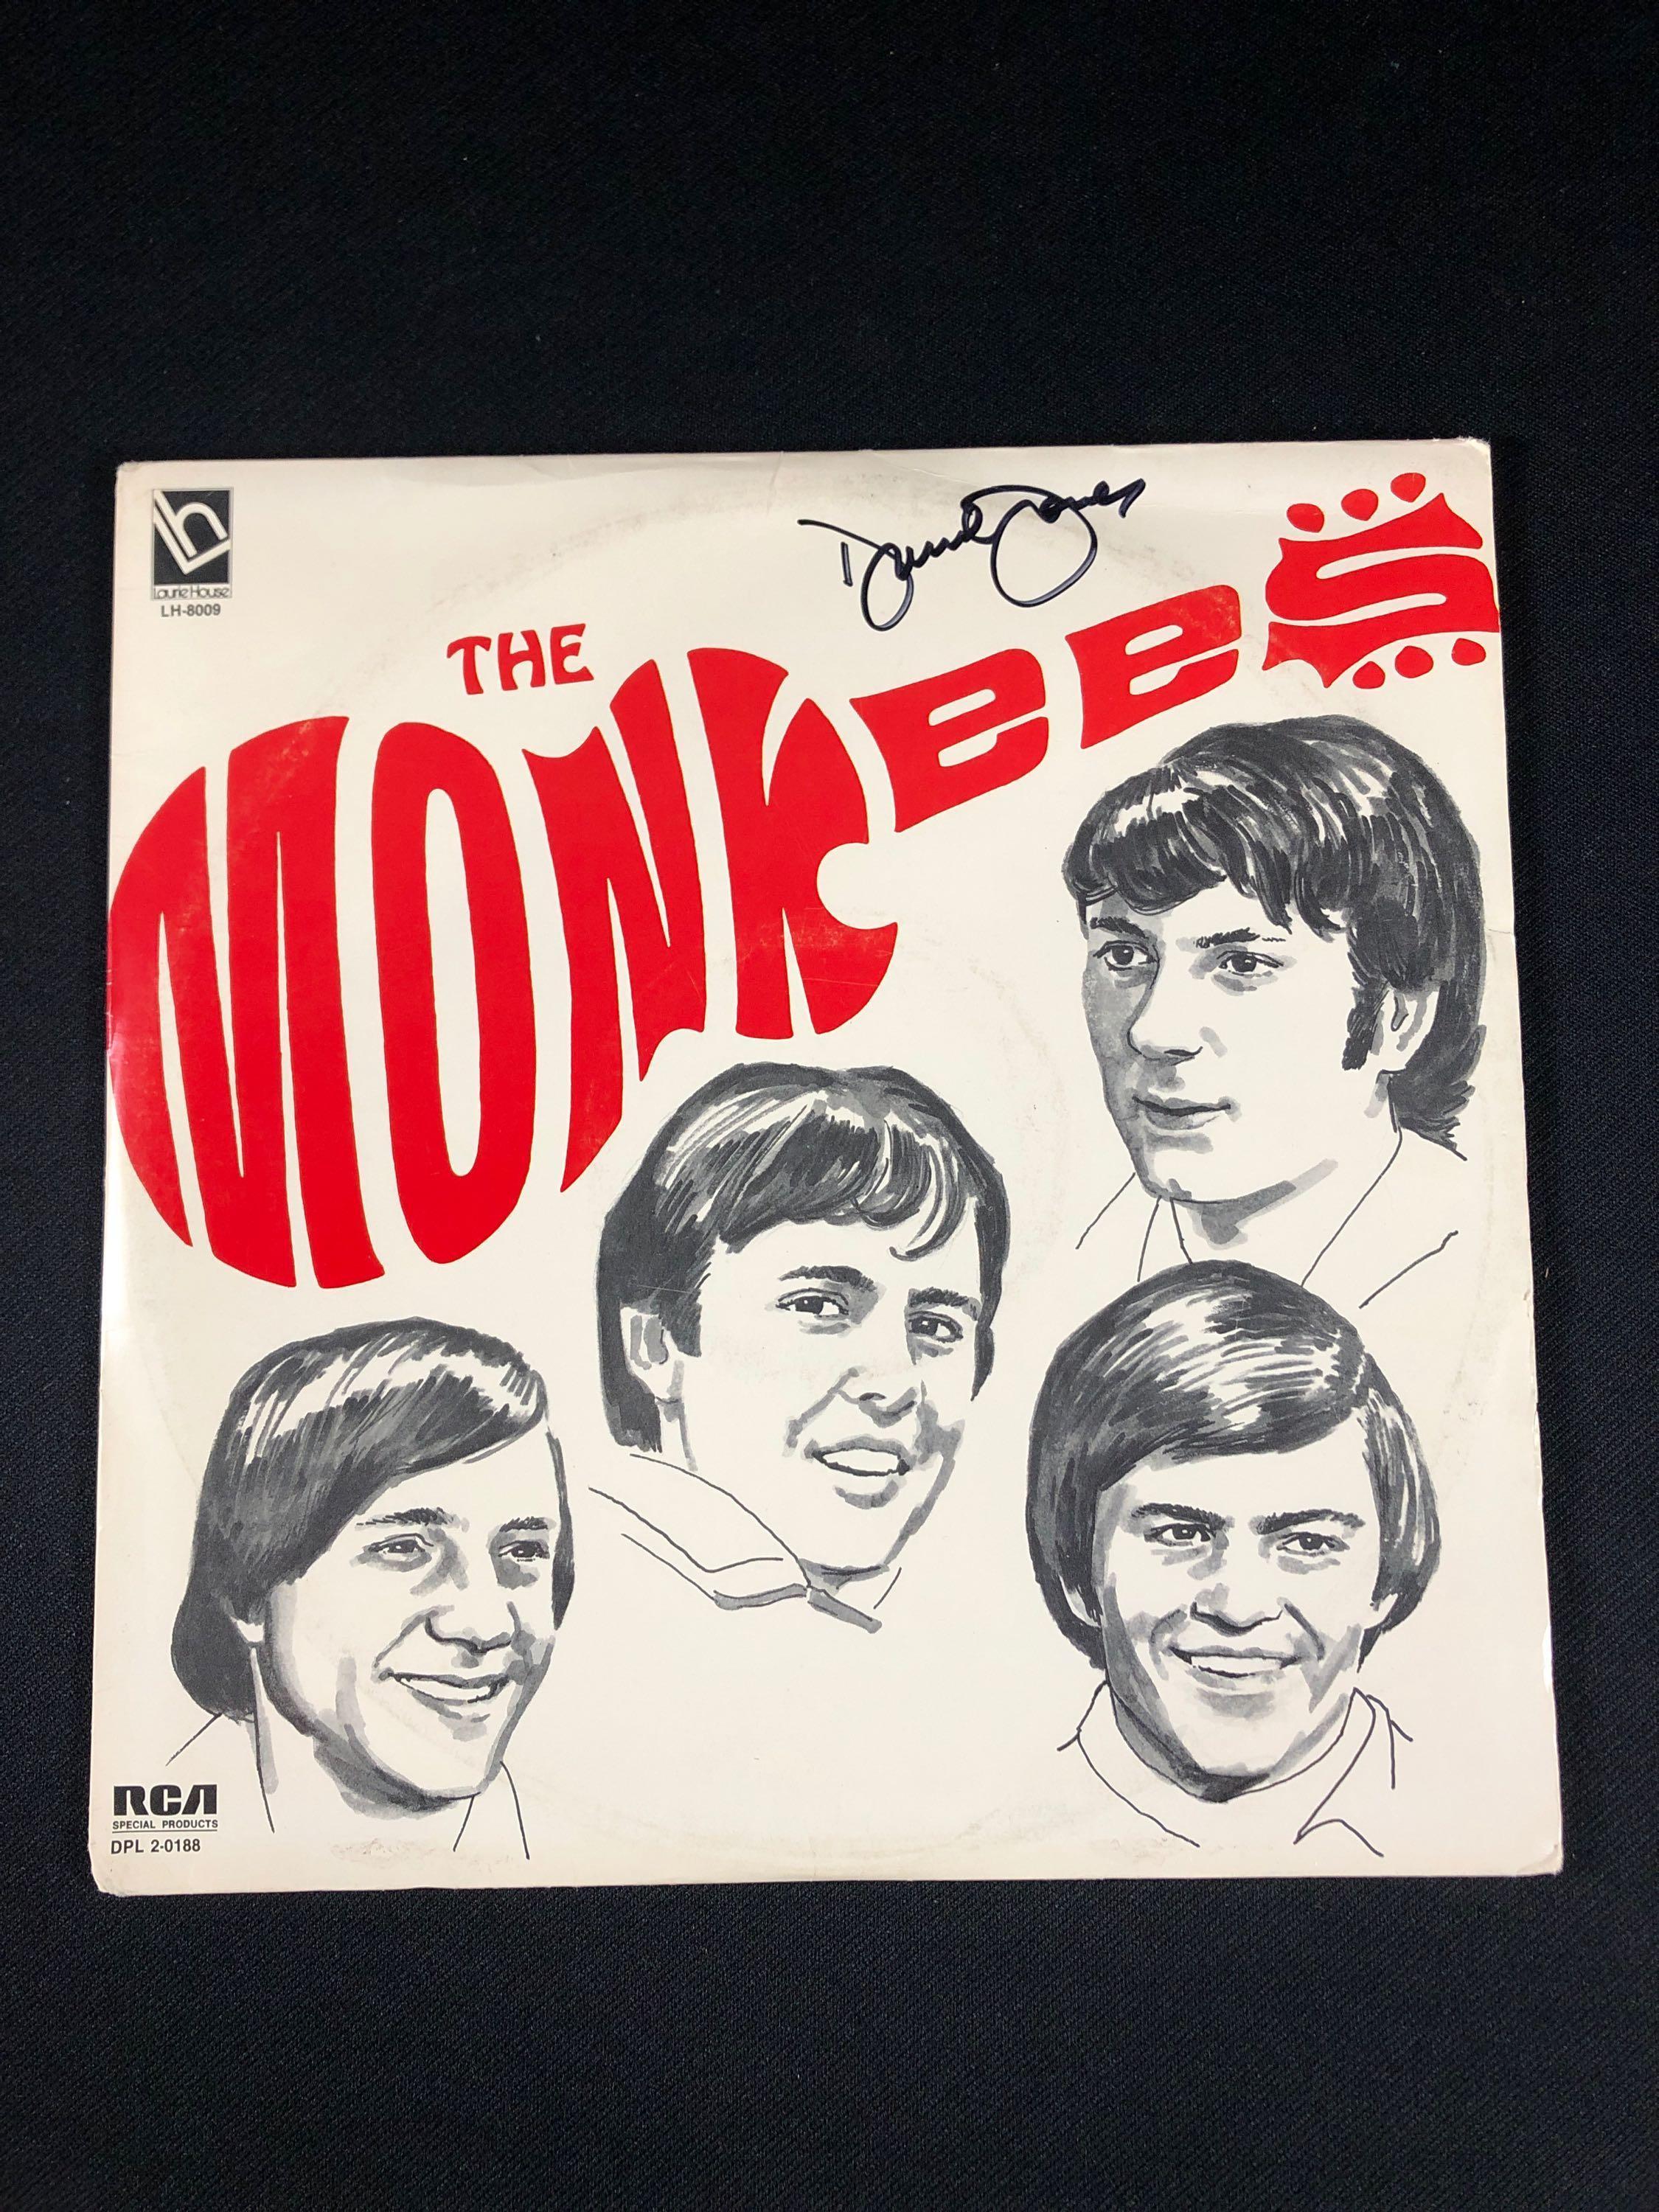 The Monkees Autographed Album by Davy Jones and Micky Dolenz